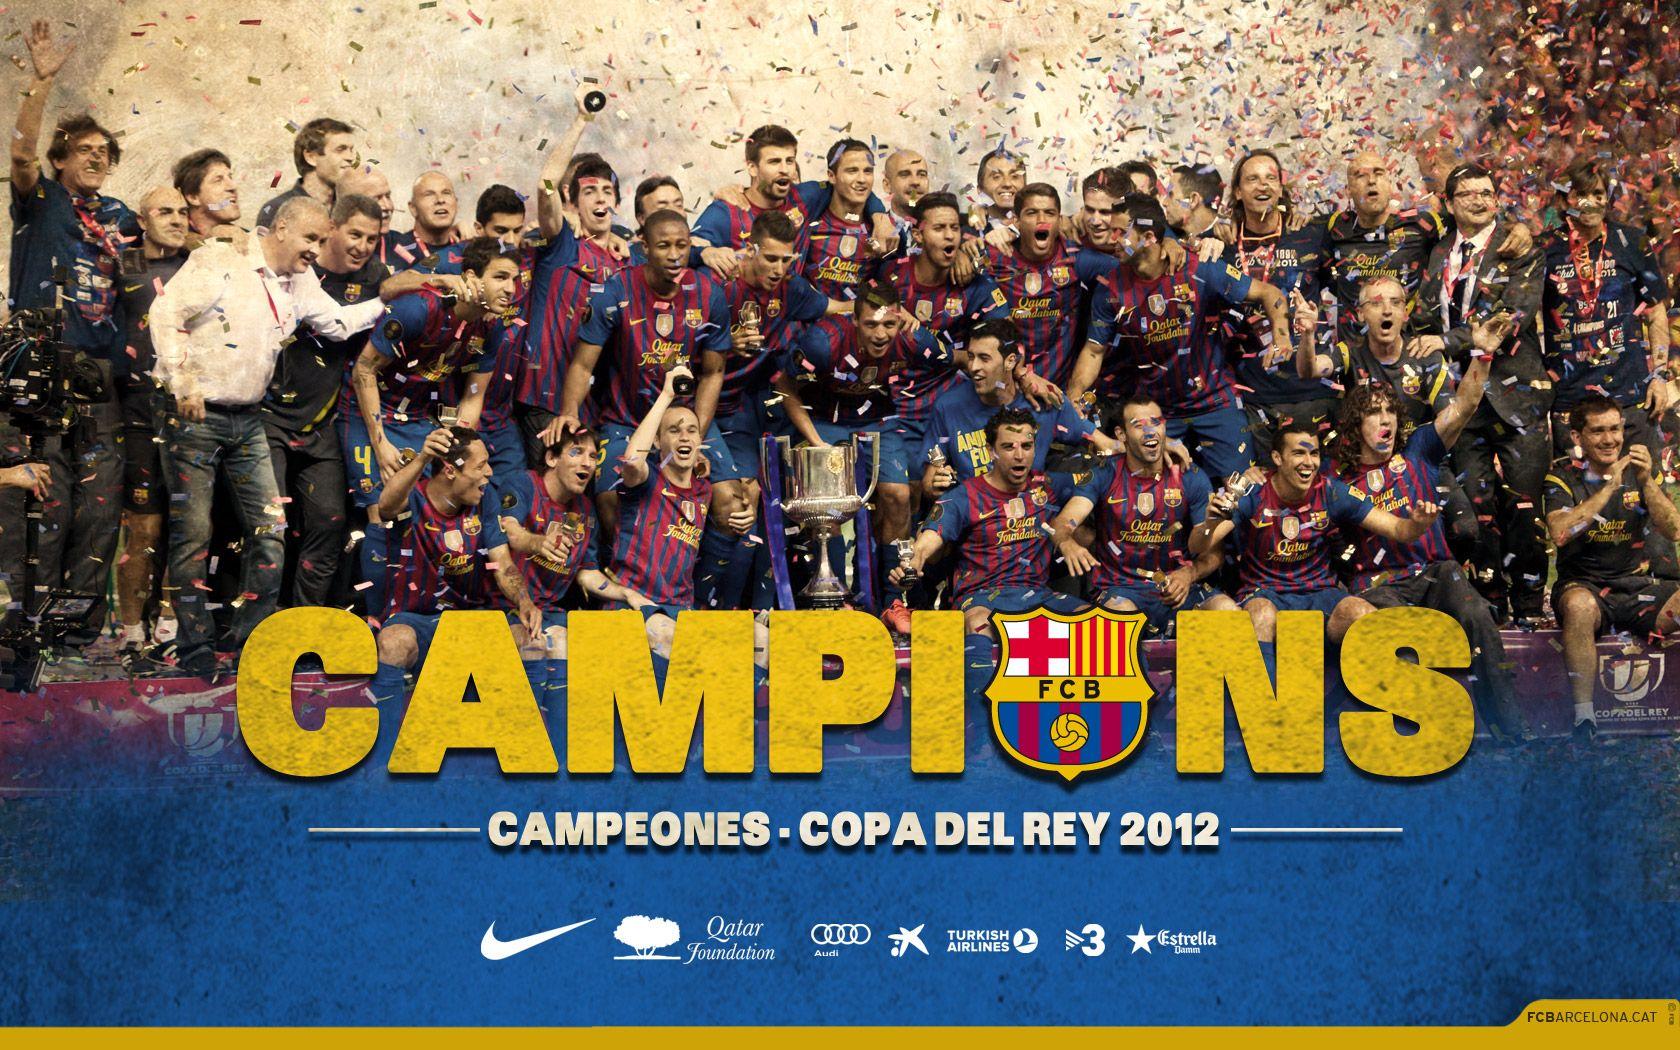 The wallpaper of cup winners